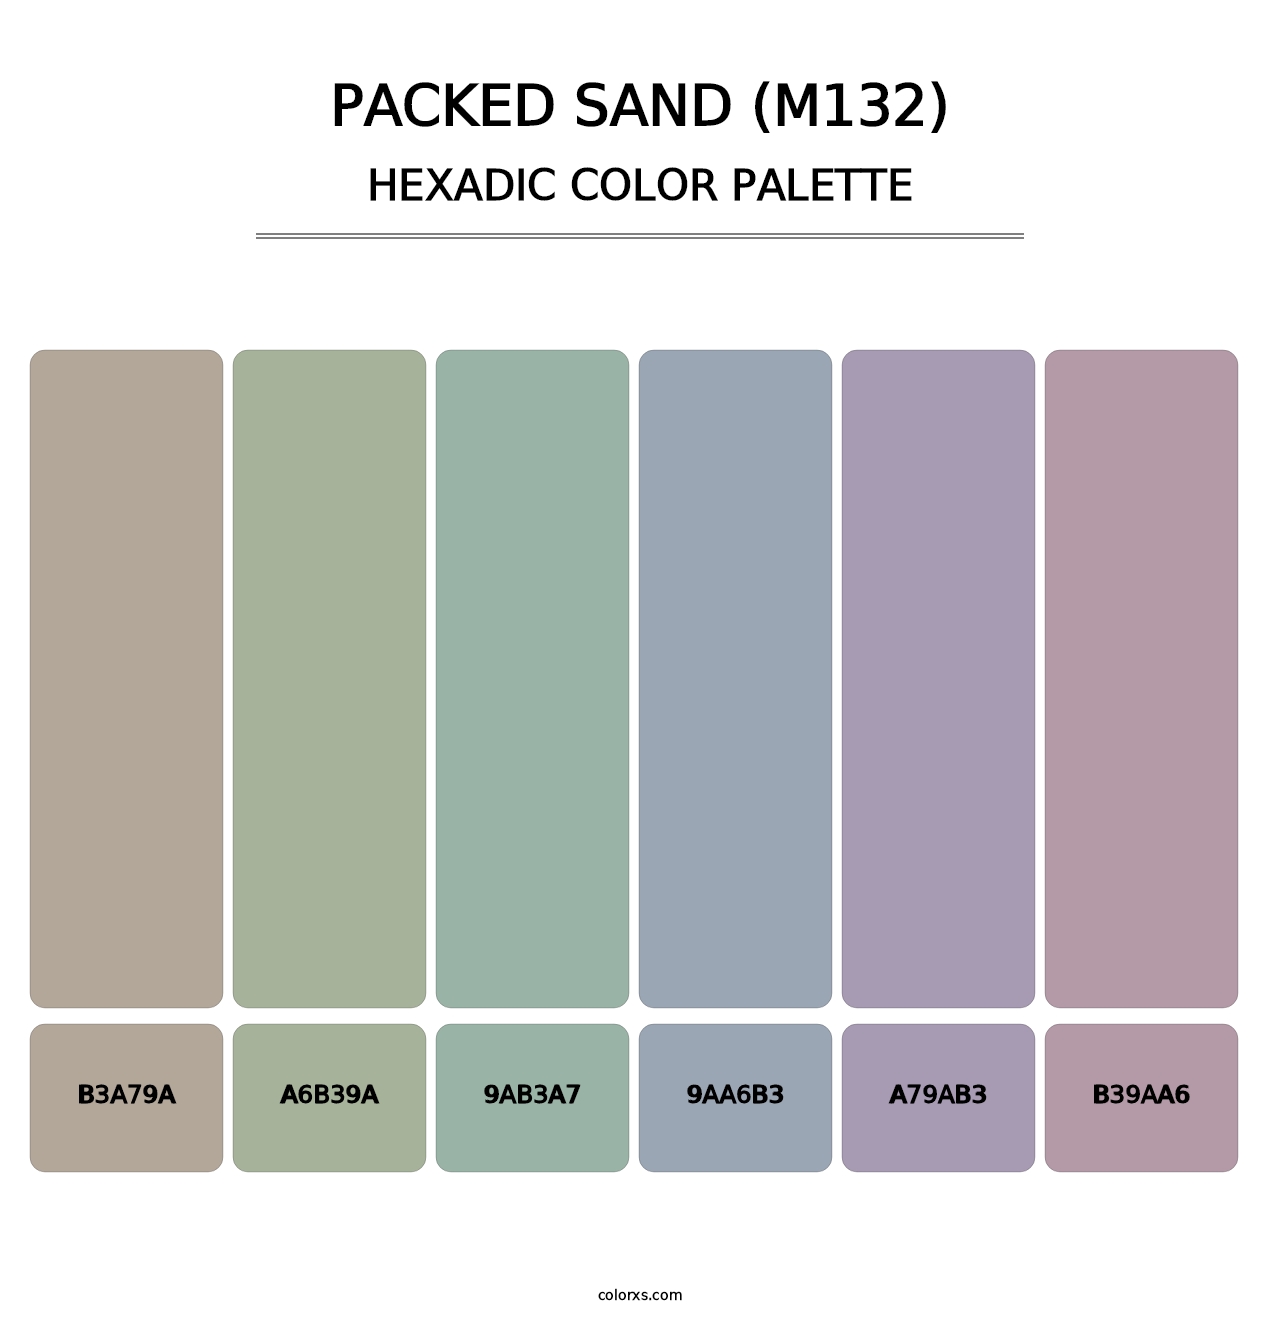 Packed Sand (M132) - Hexadic Color Palette